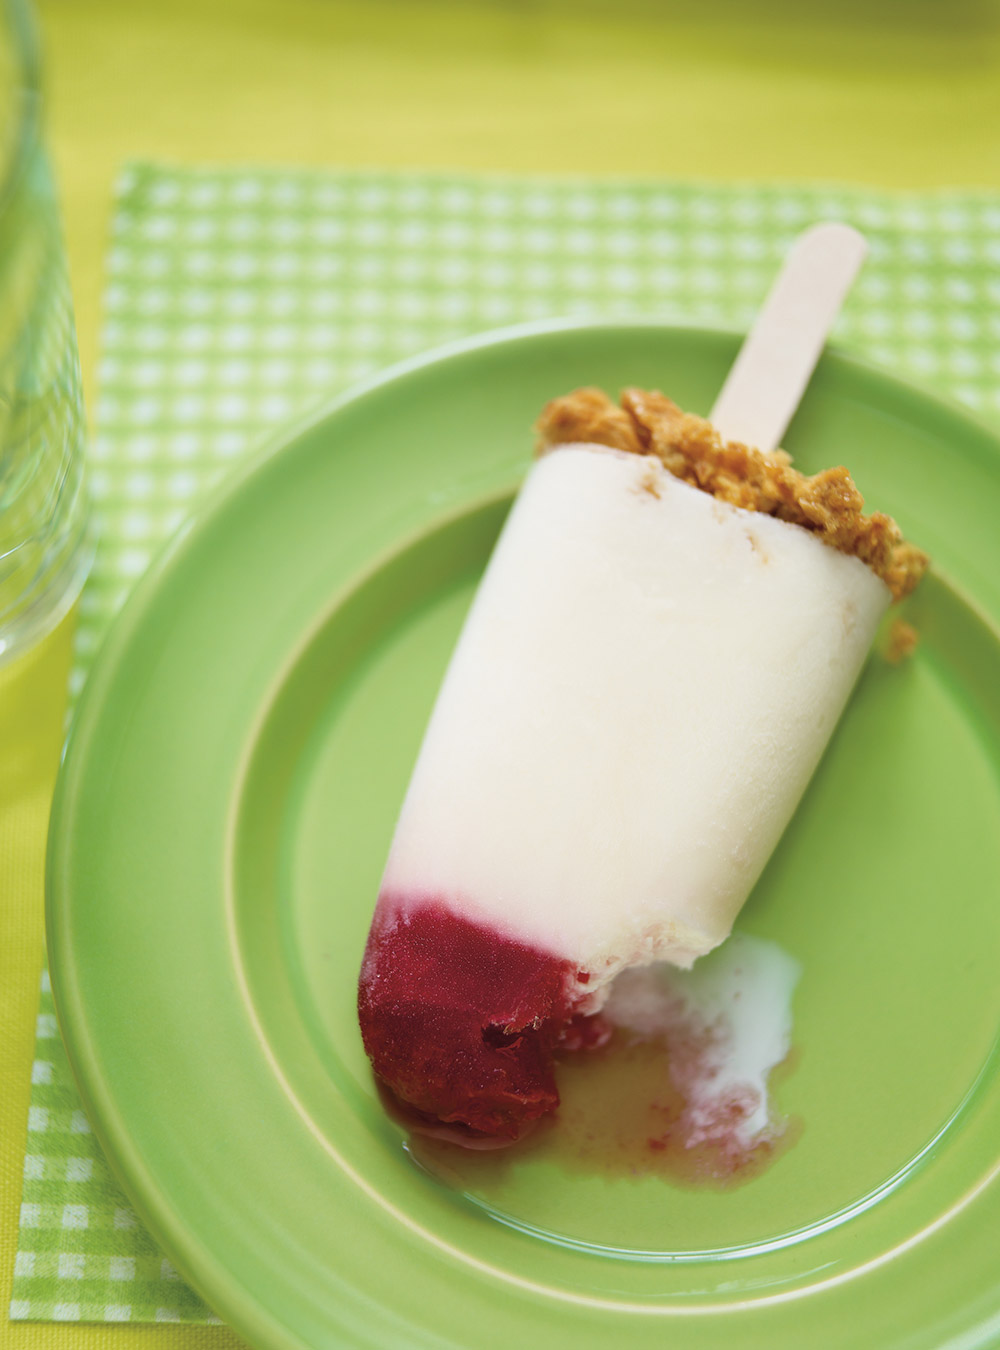 "Cheesecake" Popsicles